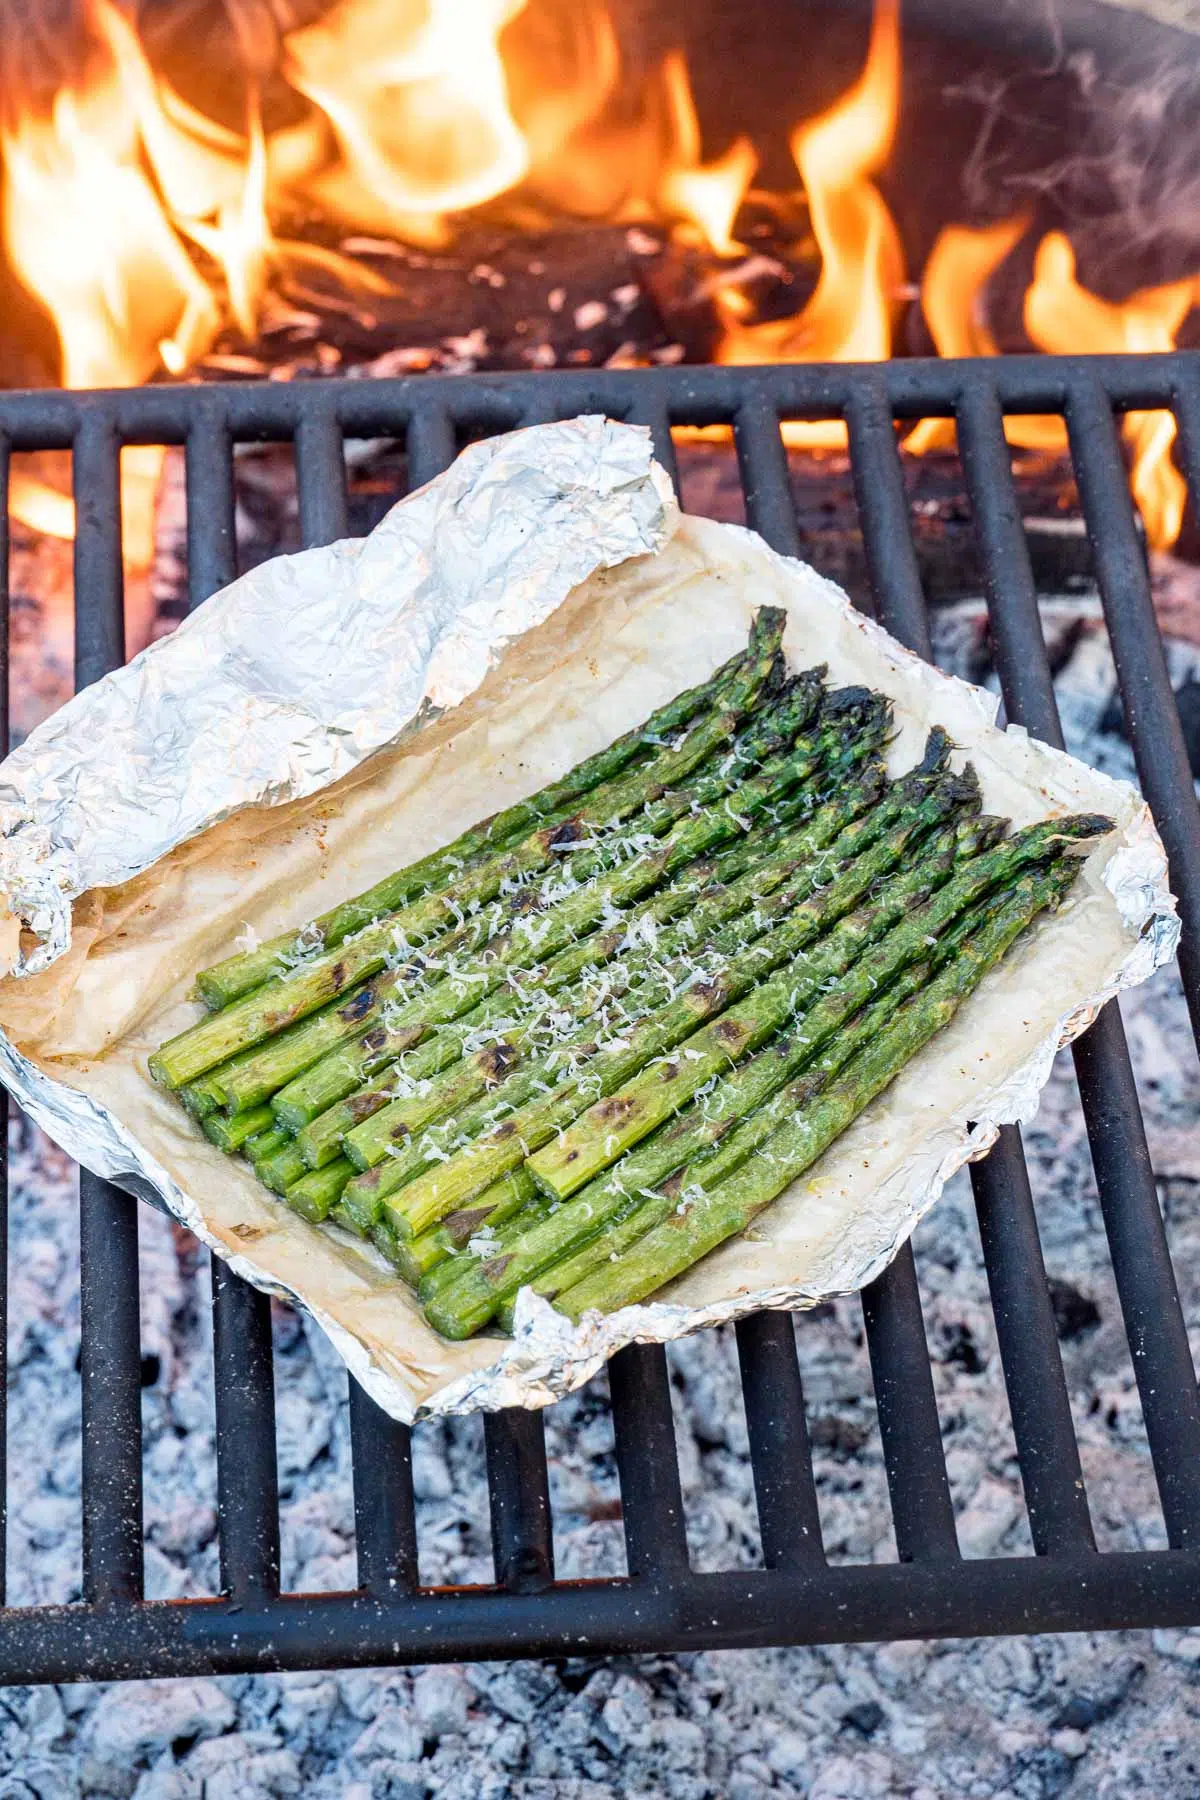 Grilled asparagus foil packets with open flame in the background.